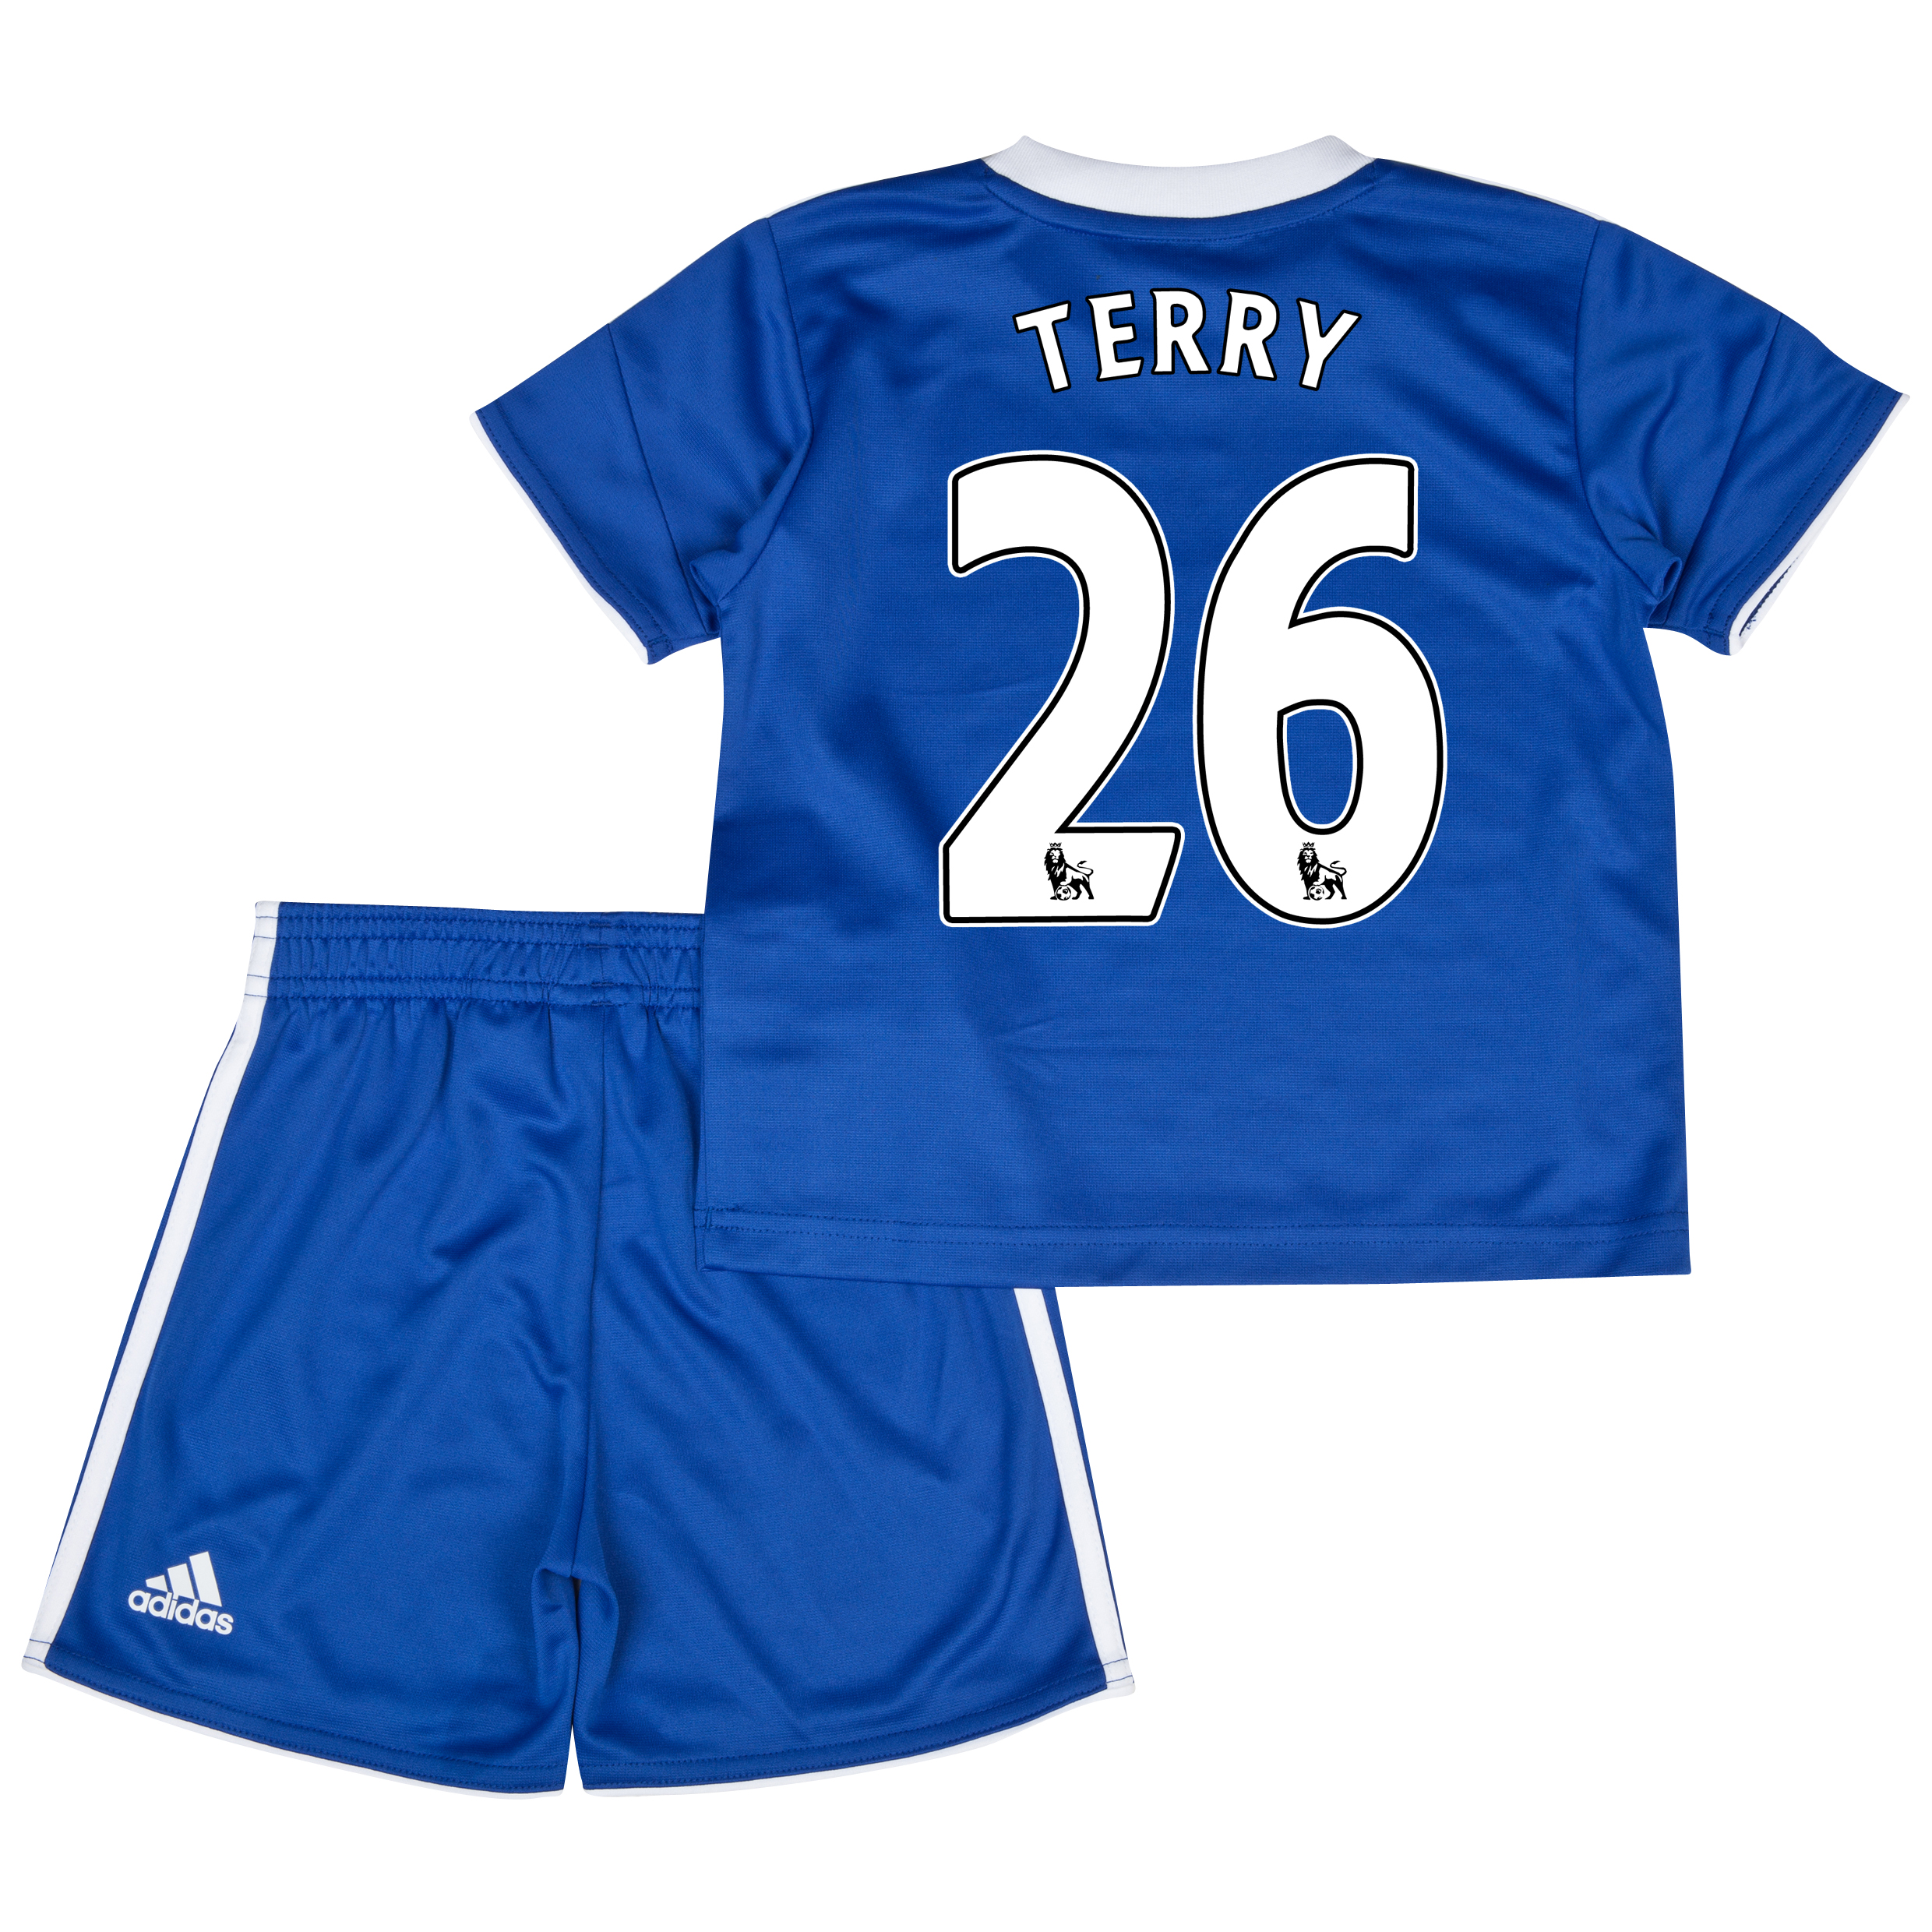 Chelsea Home Mini Kit 2013/14 with Terry 26 printing